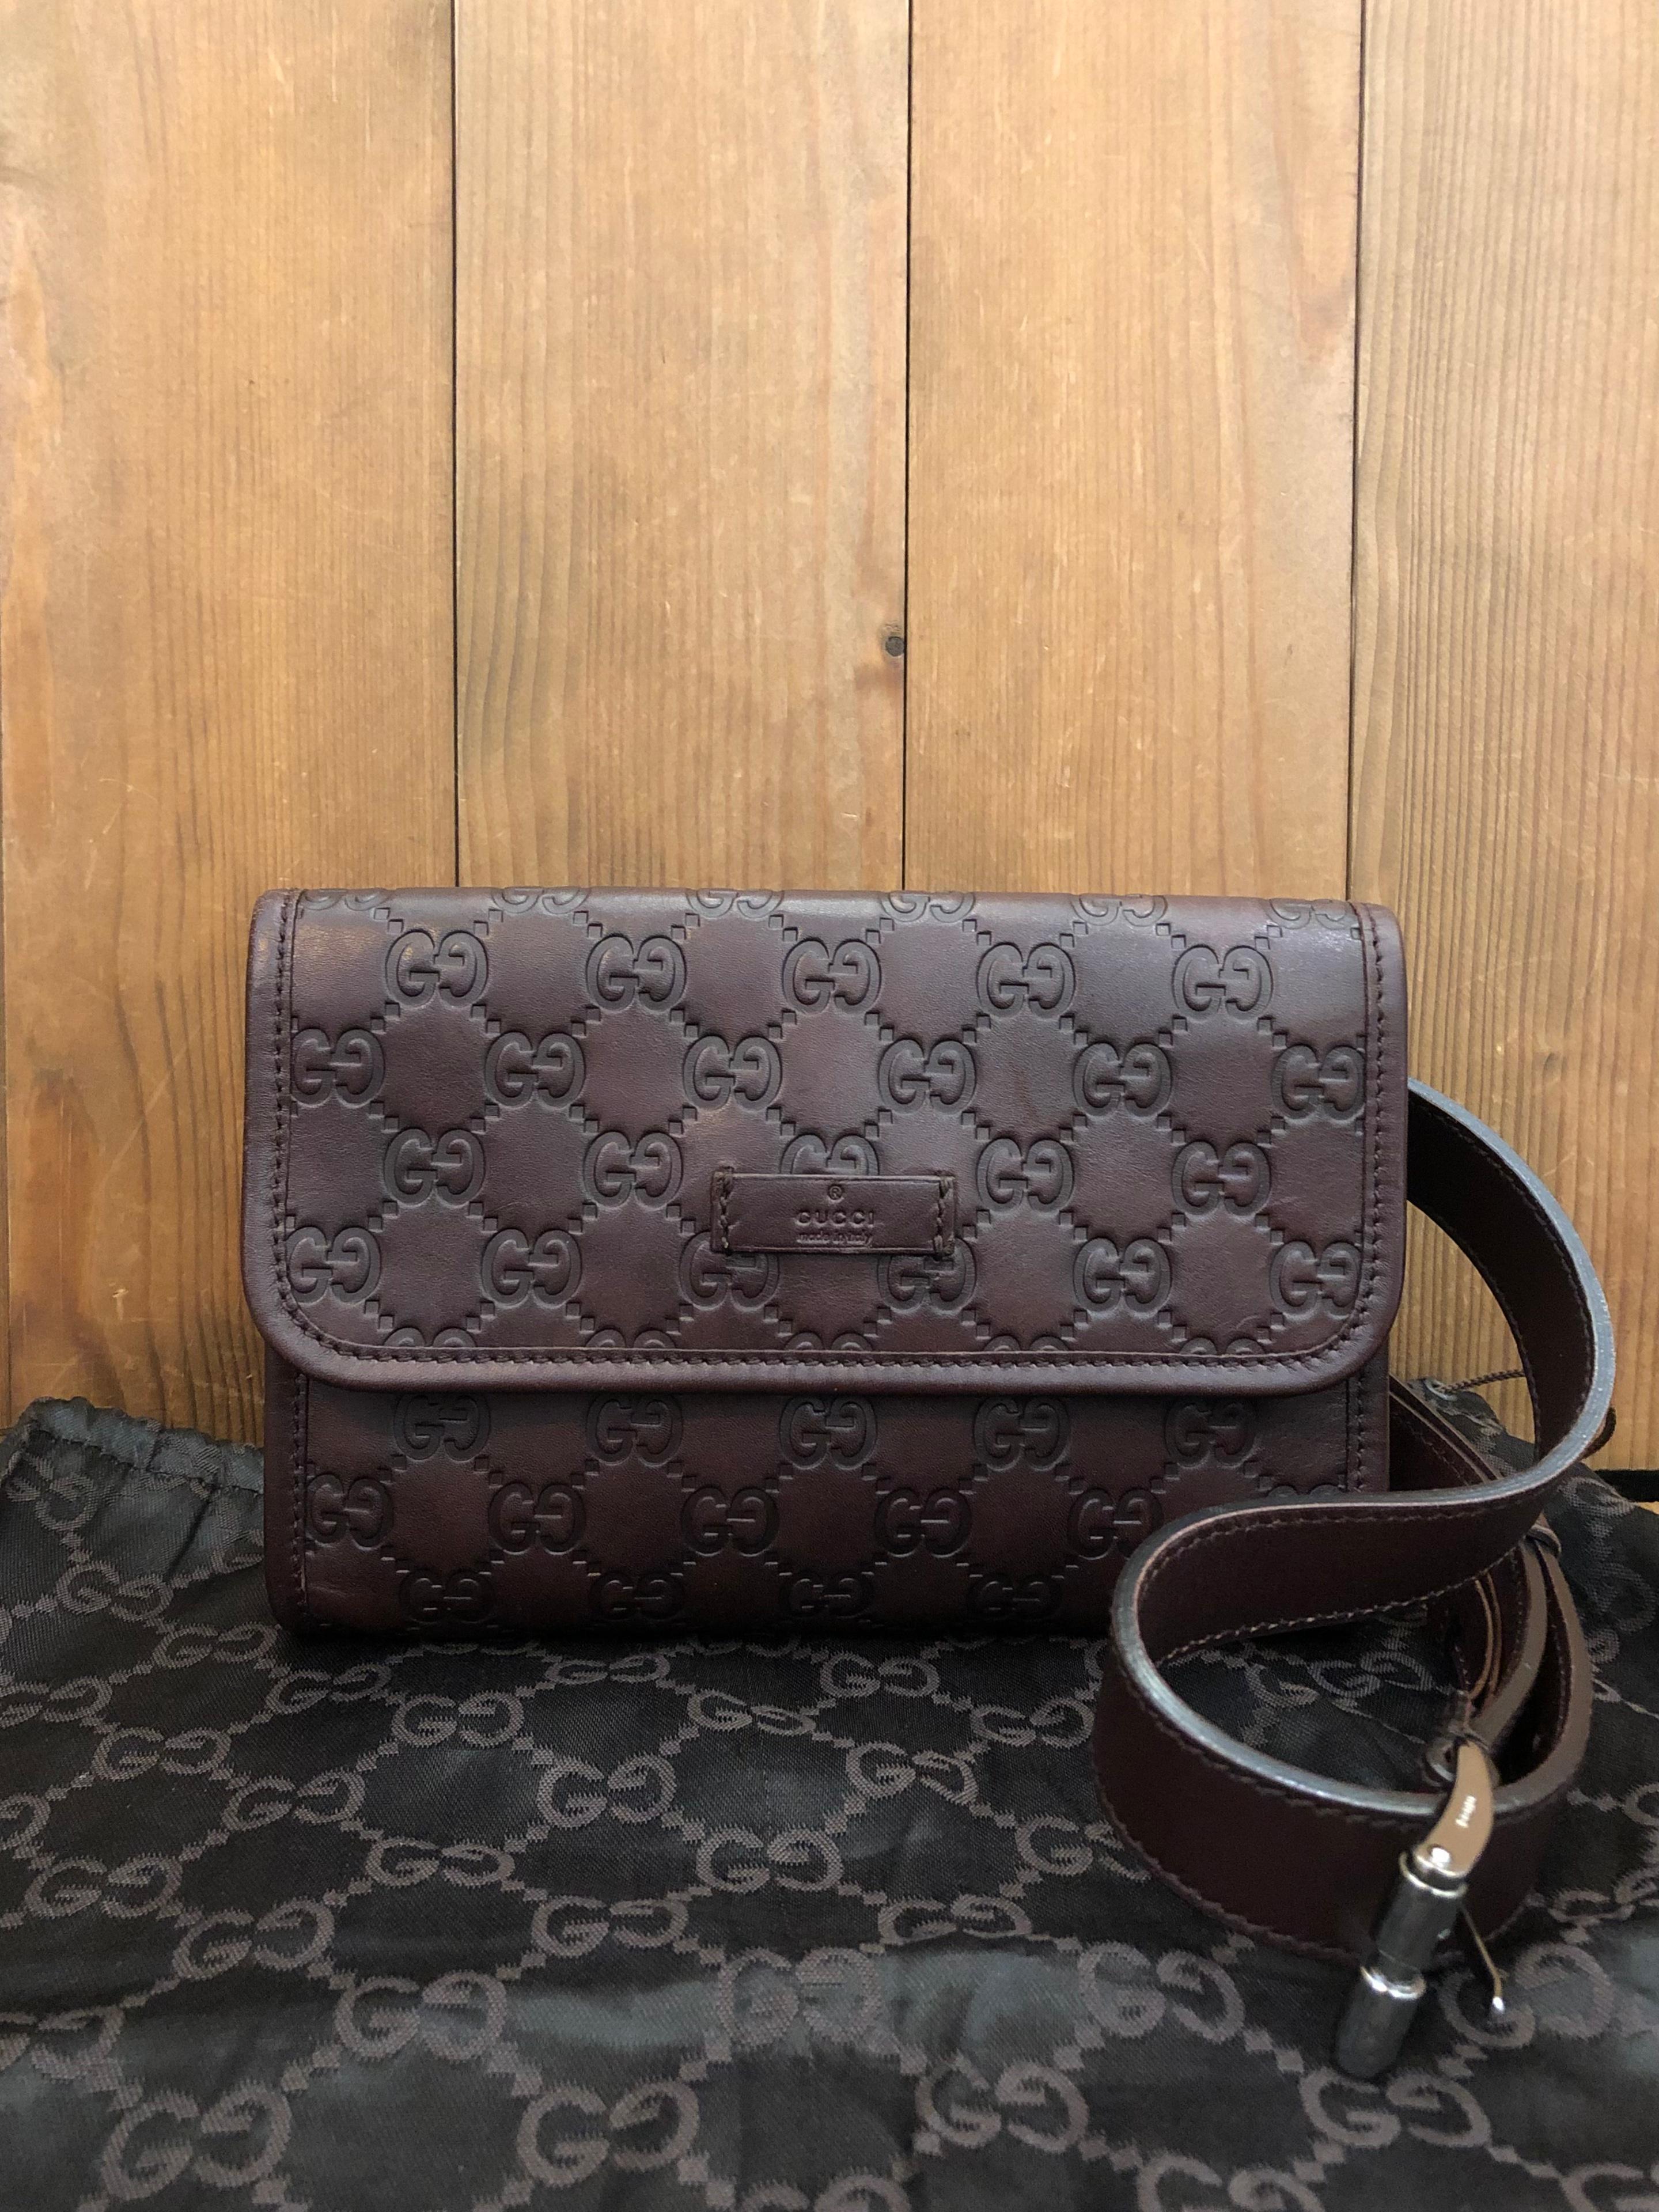 This GUCCI belt bag is crafted of Guccissima GG embossed calfskin leather in chocolate brown featuring silver toned hardware. This Gucci belt bag comes with a detachable calfskin leather belt adjustable with five holes. Front flap magnetic snap